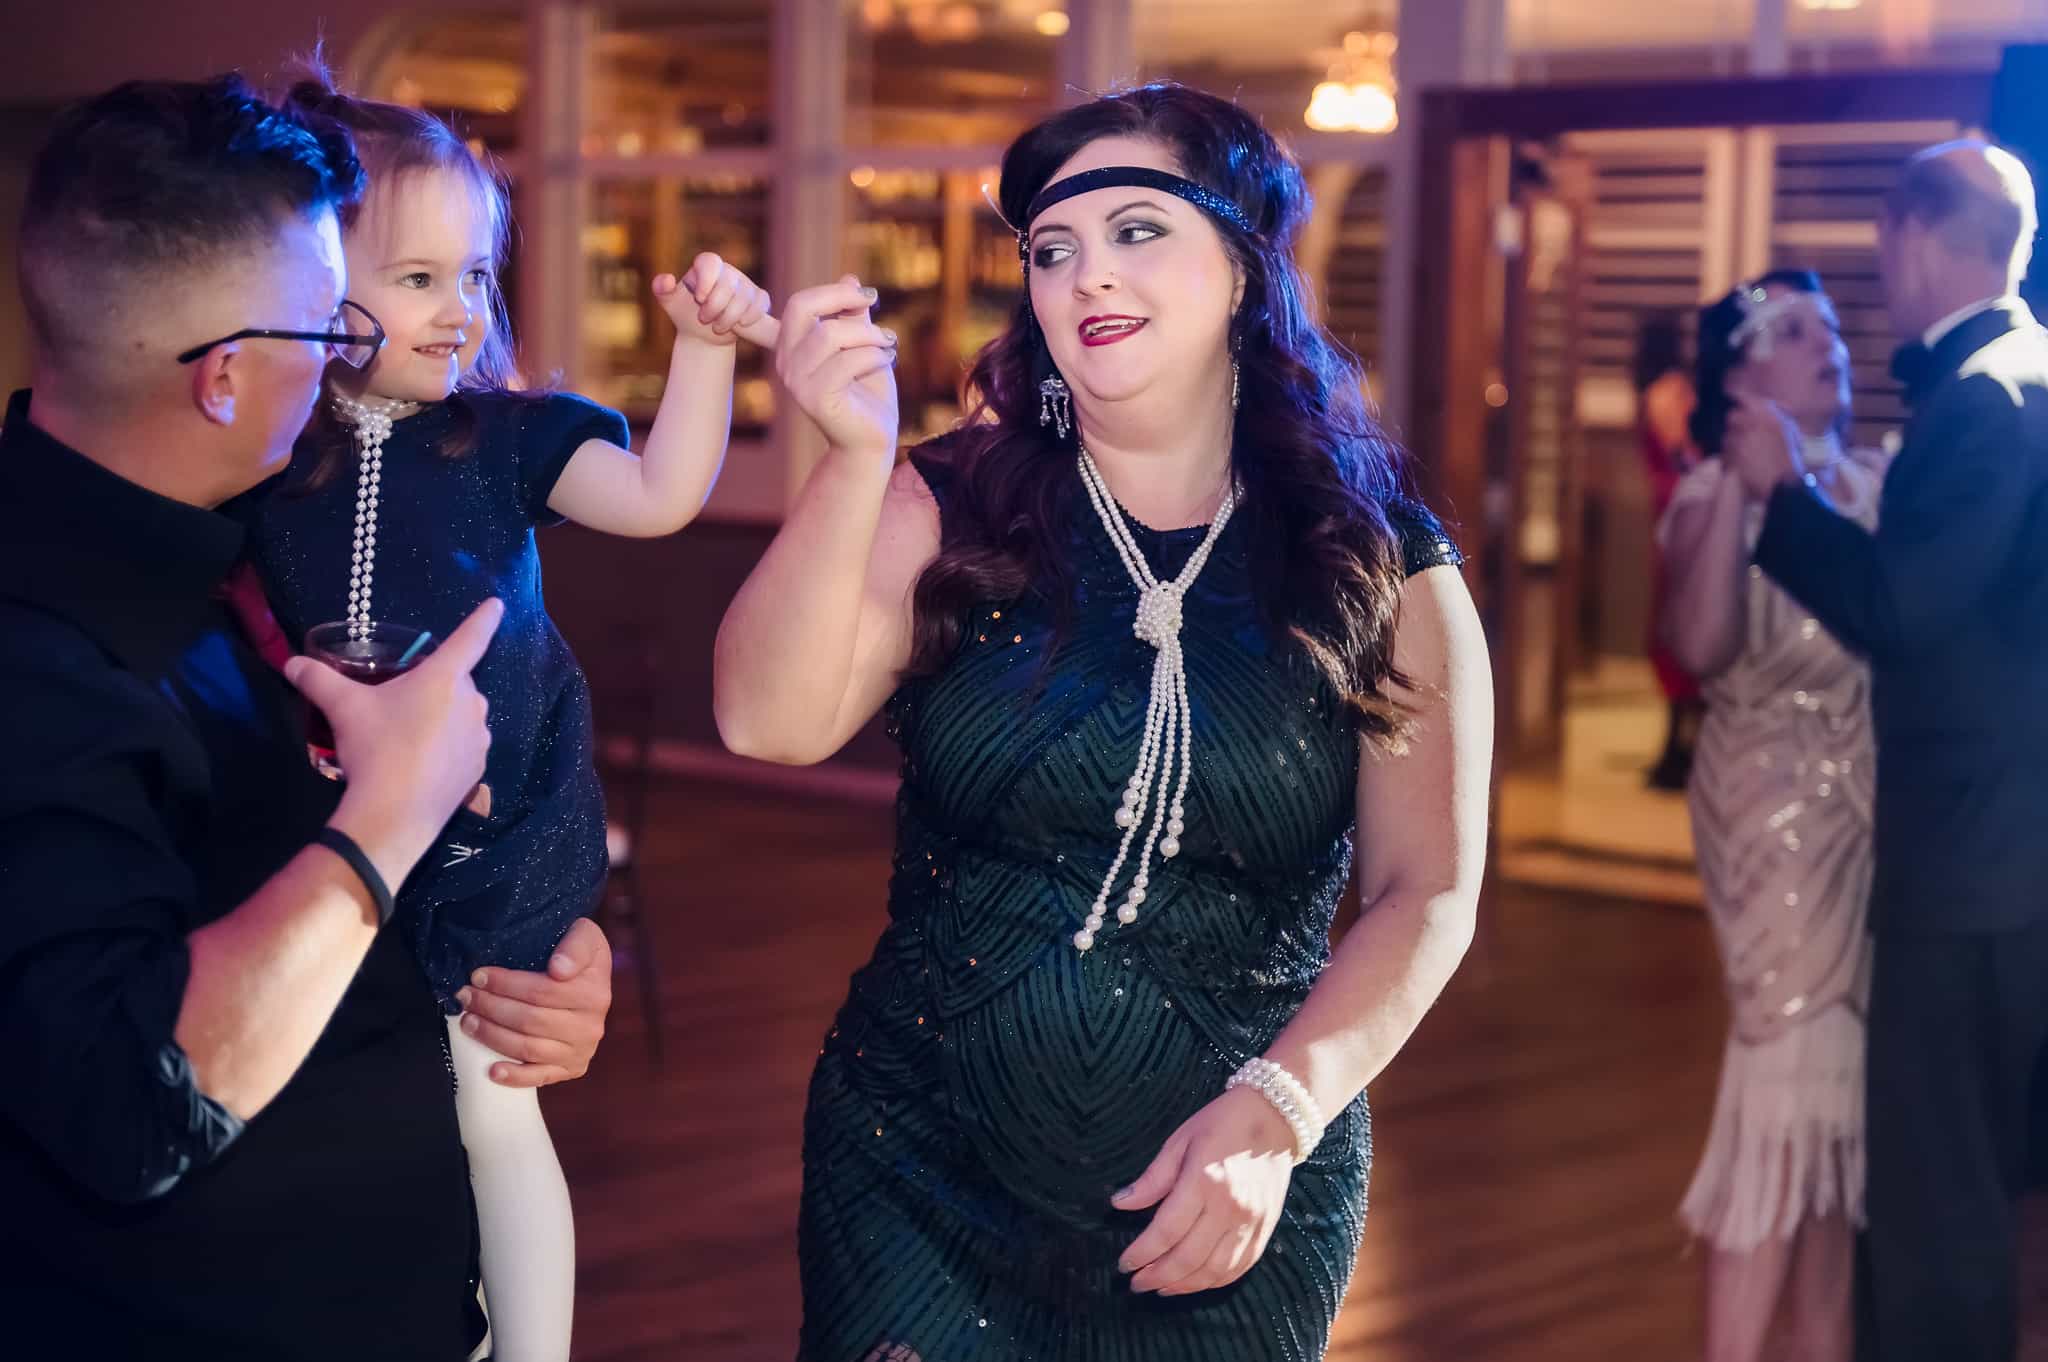 A man lifts his younger daughter to dance with him and his wife at a 1920s Great Gatsby party.